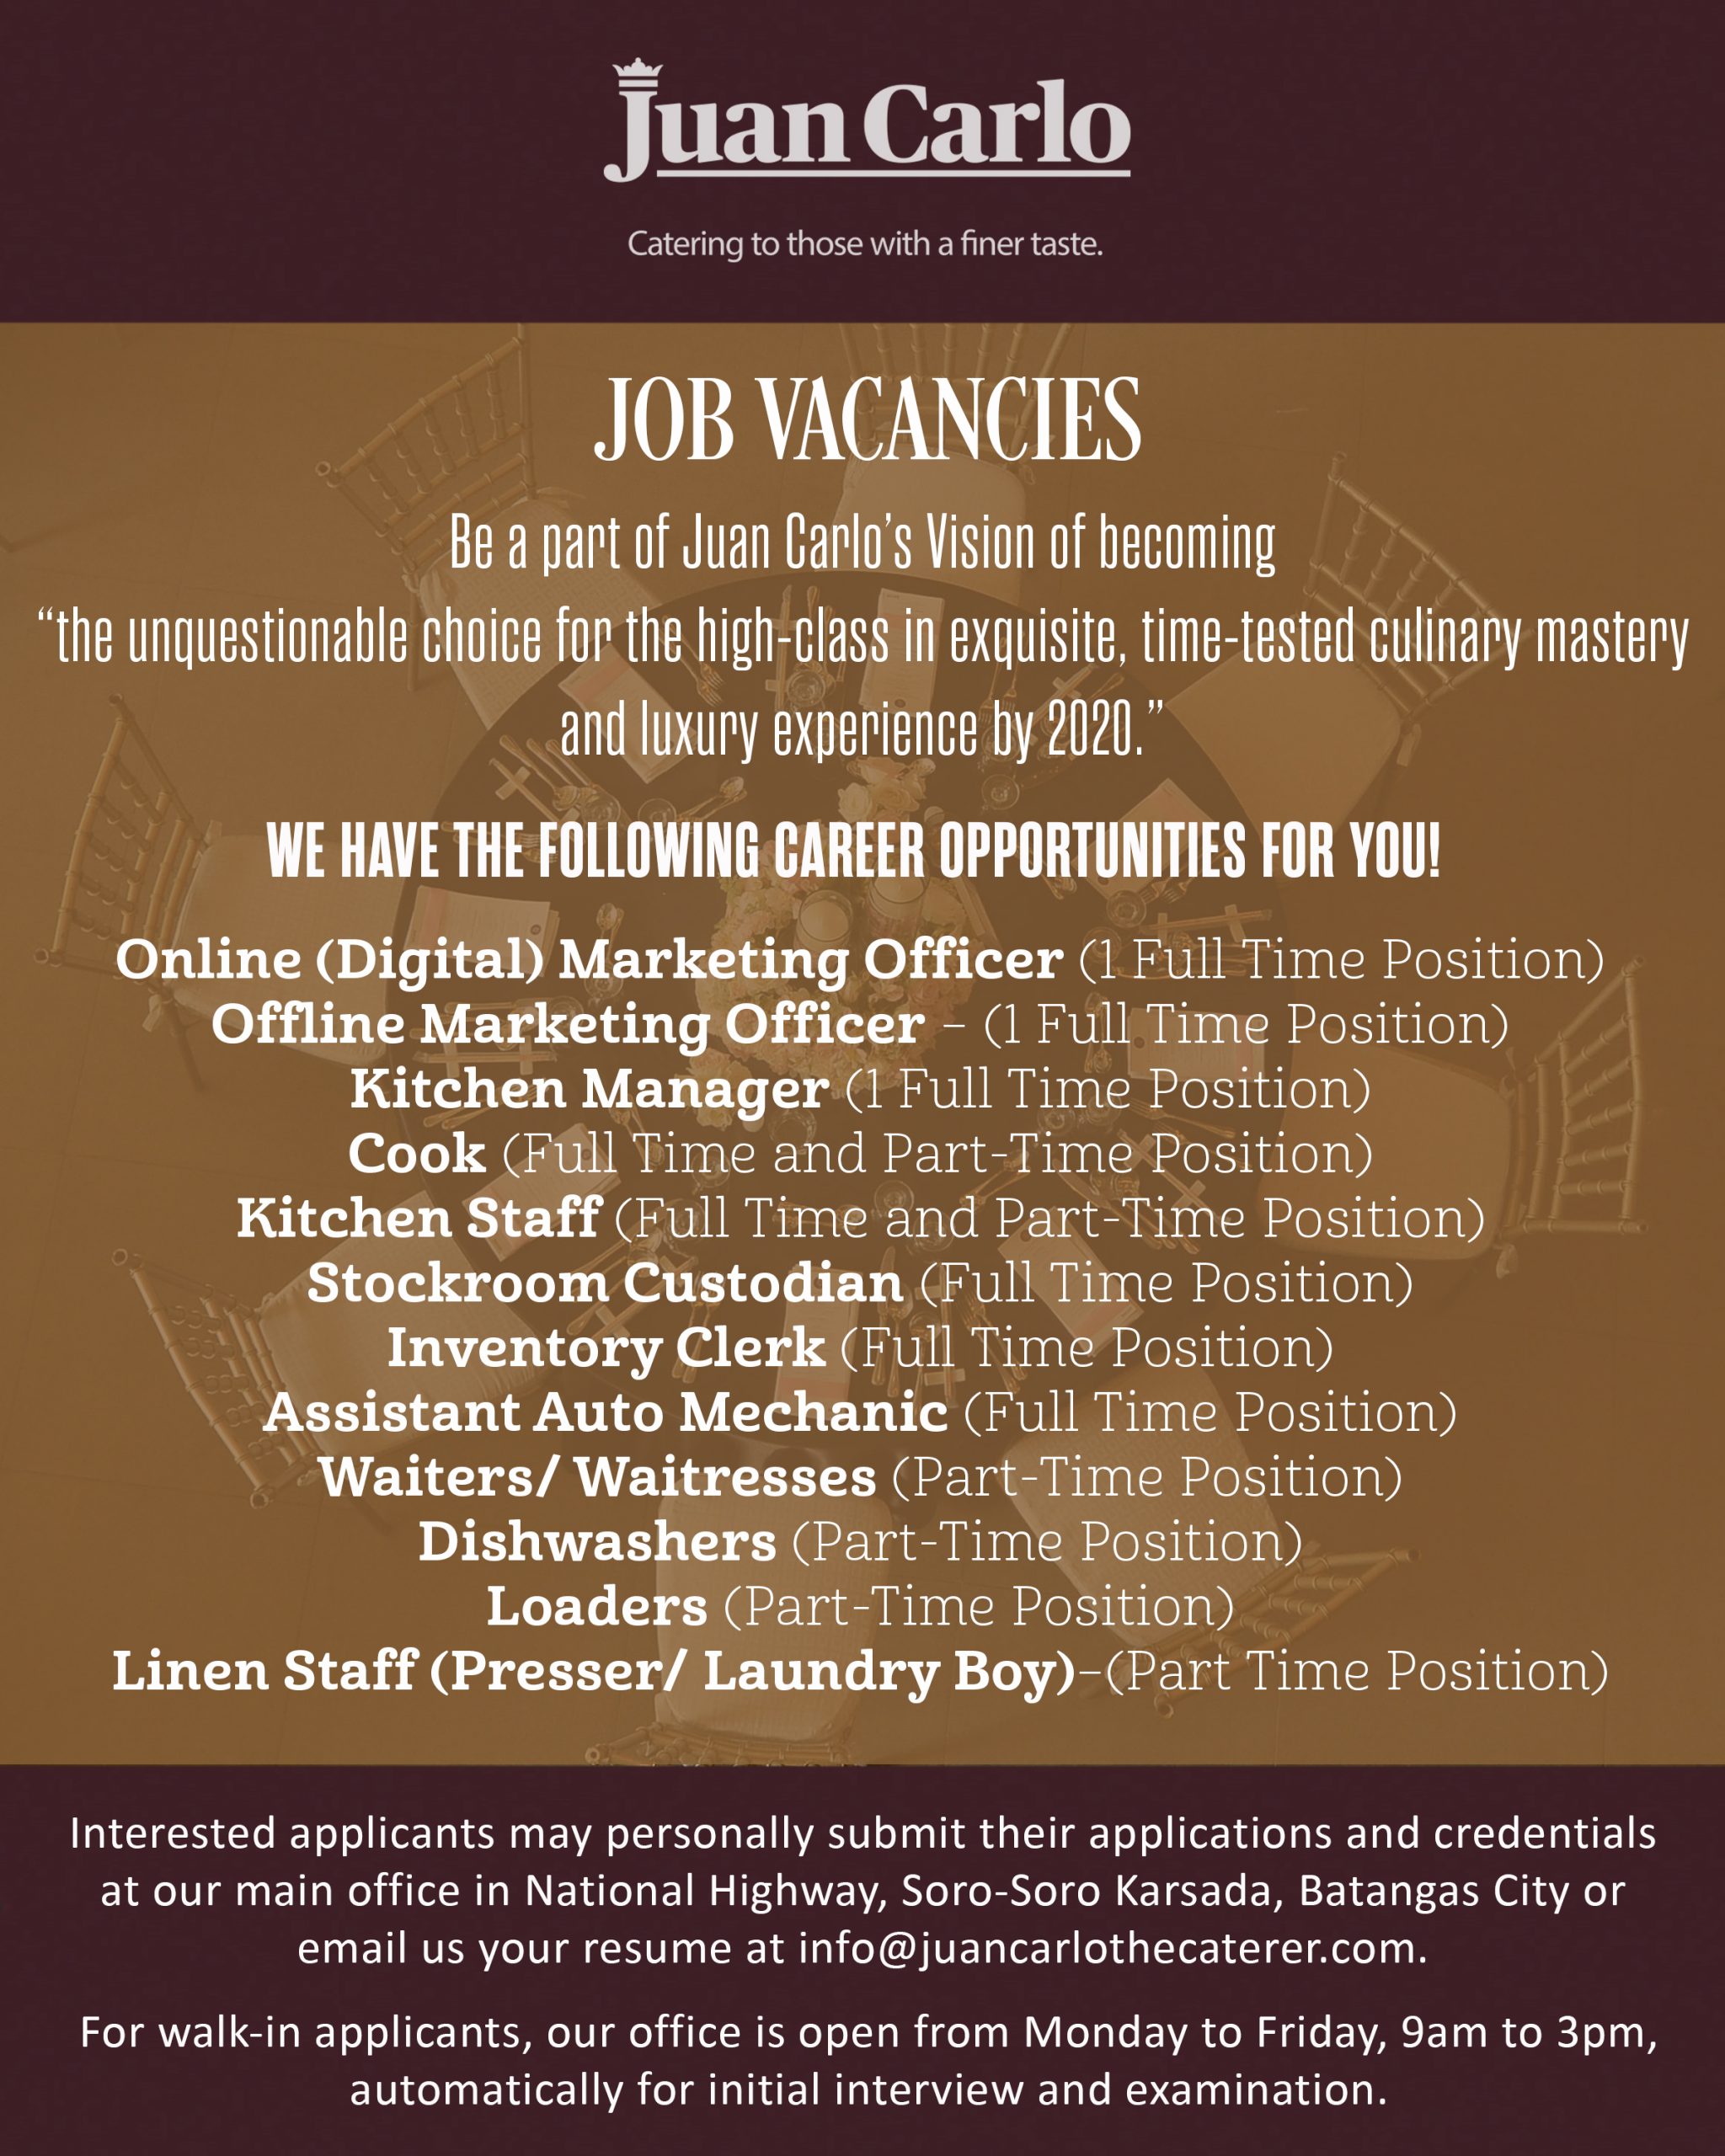 Apply Now and be ONE of us!